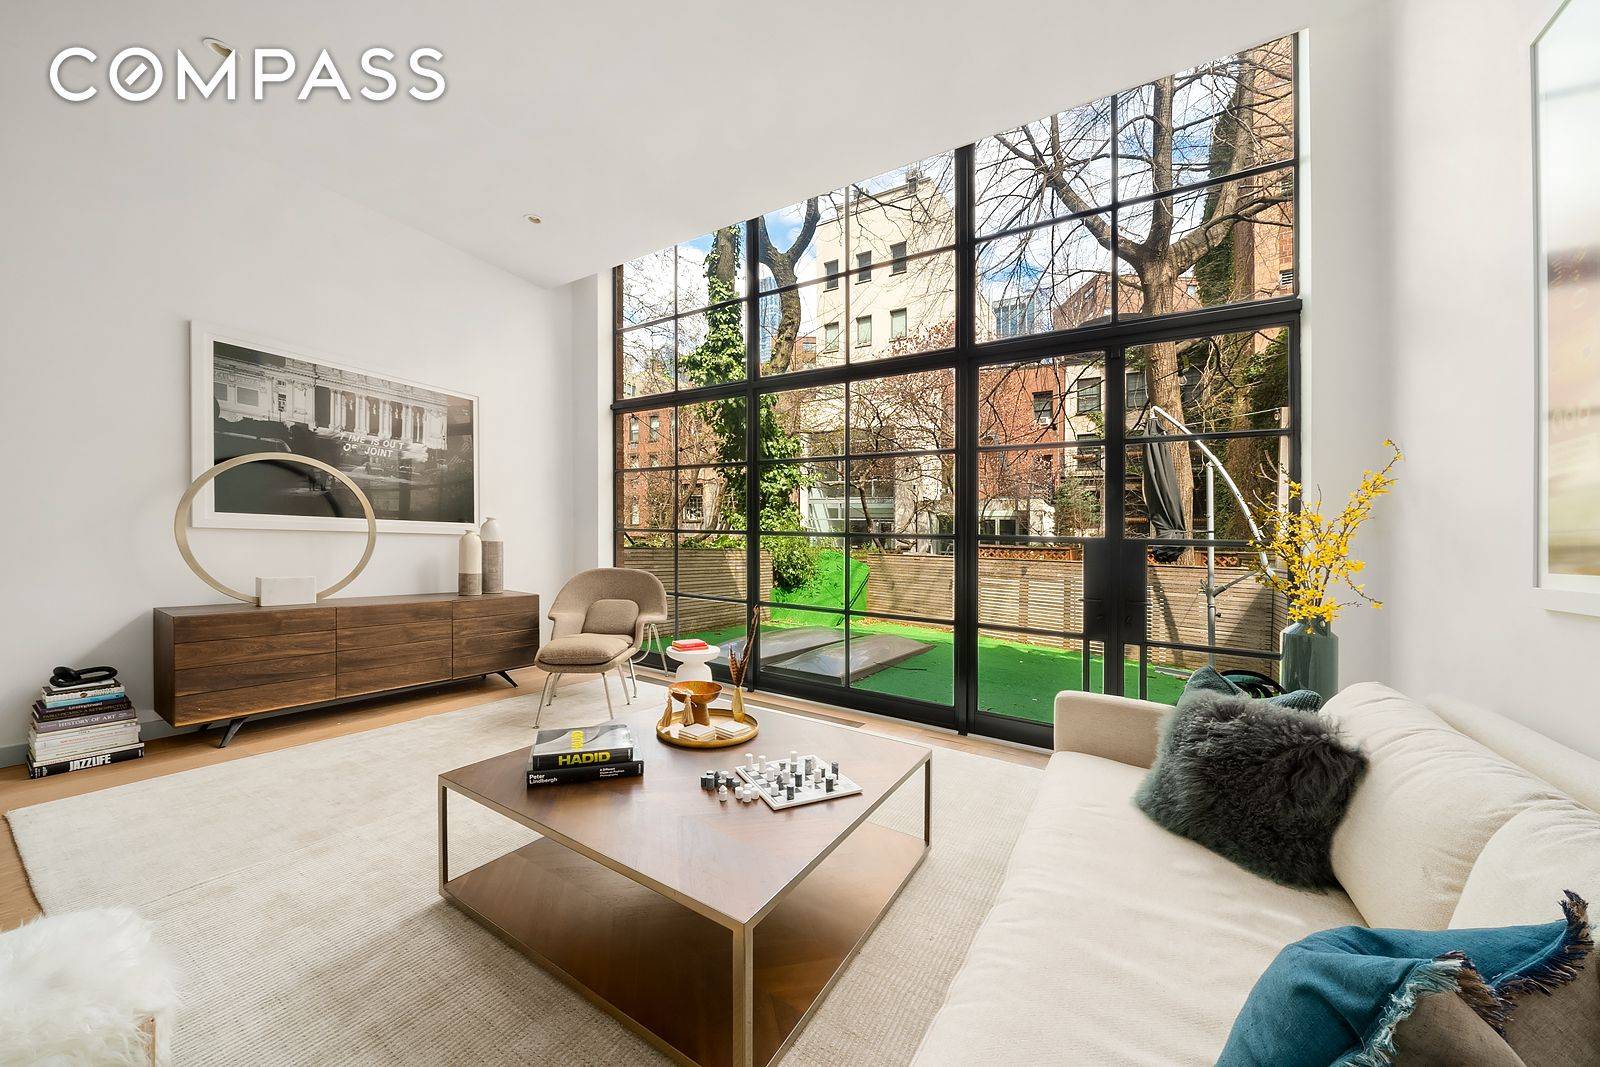 This beautifully designed 21 foot wide, 4, 073 sqft townhome was the creation of renowned AD 100 architects, SPaN, who crafted a highly elevated residential experience featuring an all glass ...